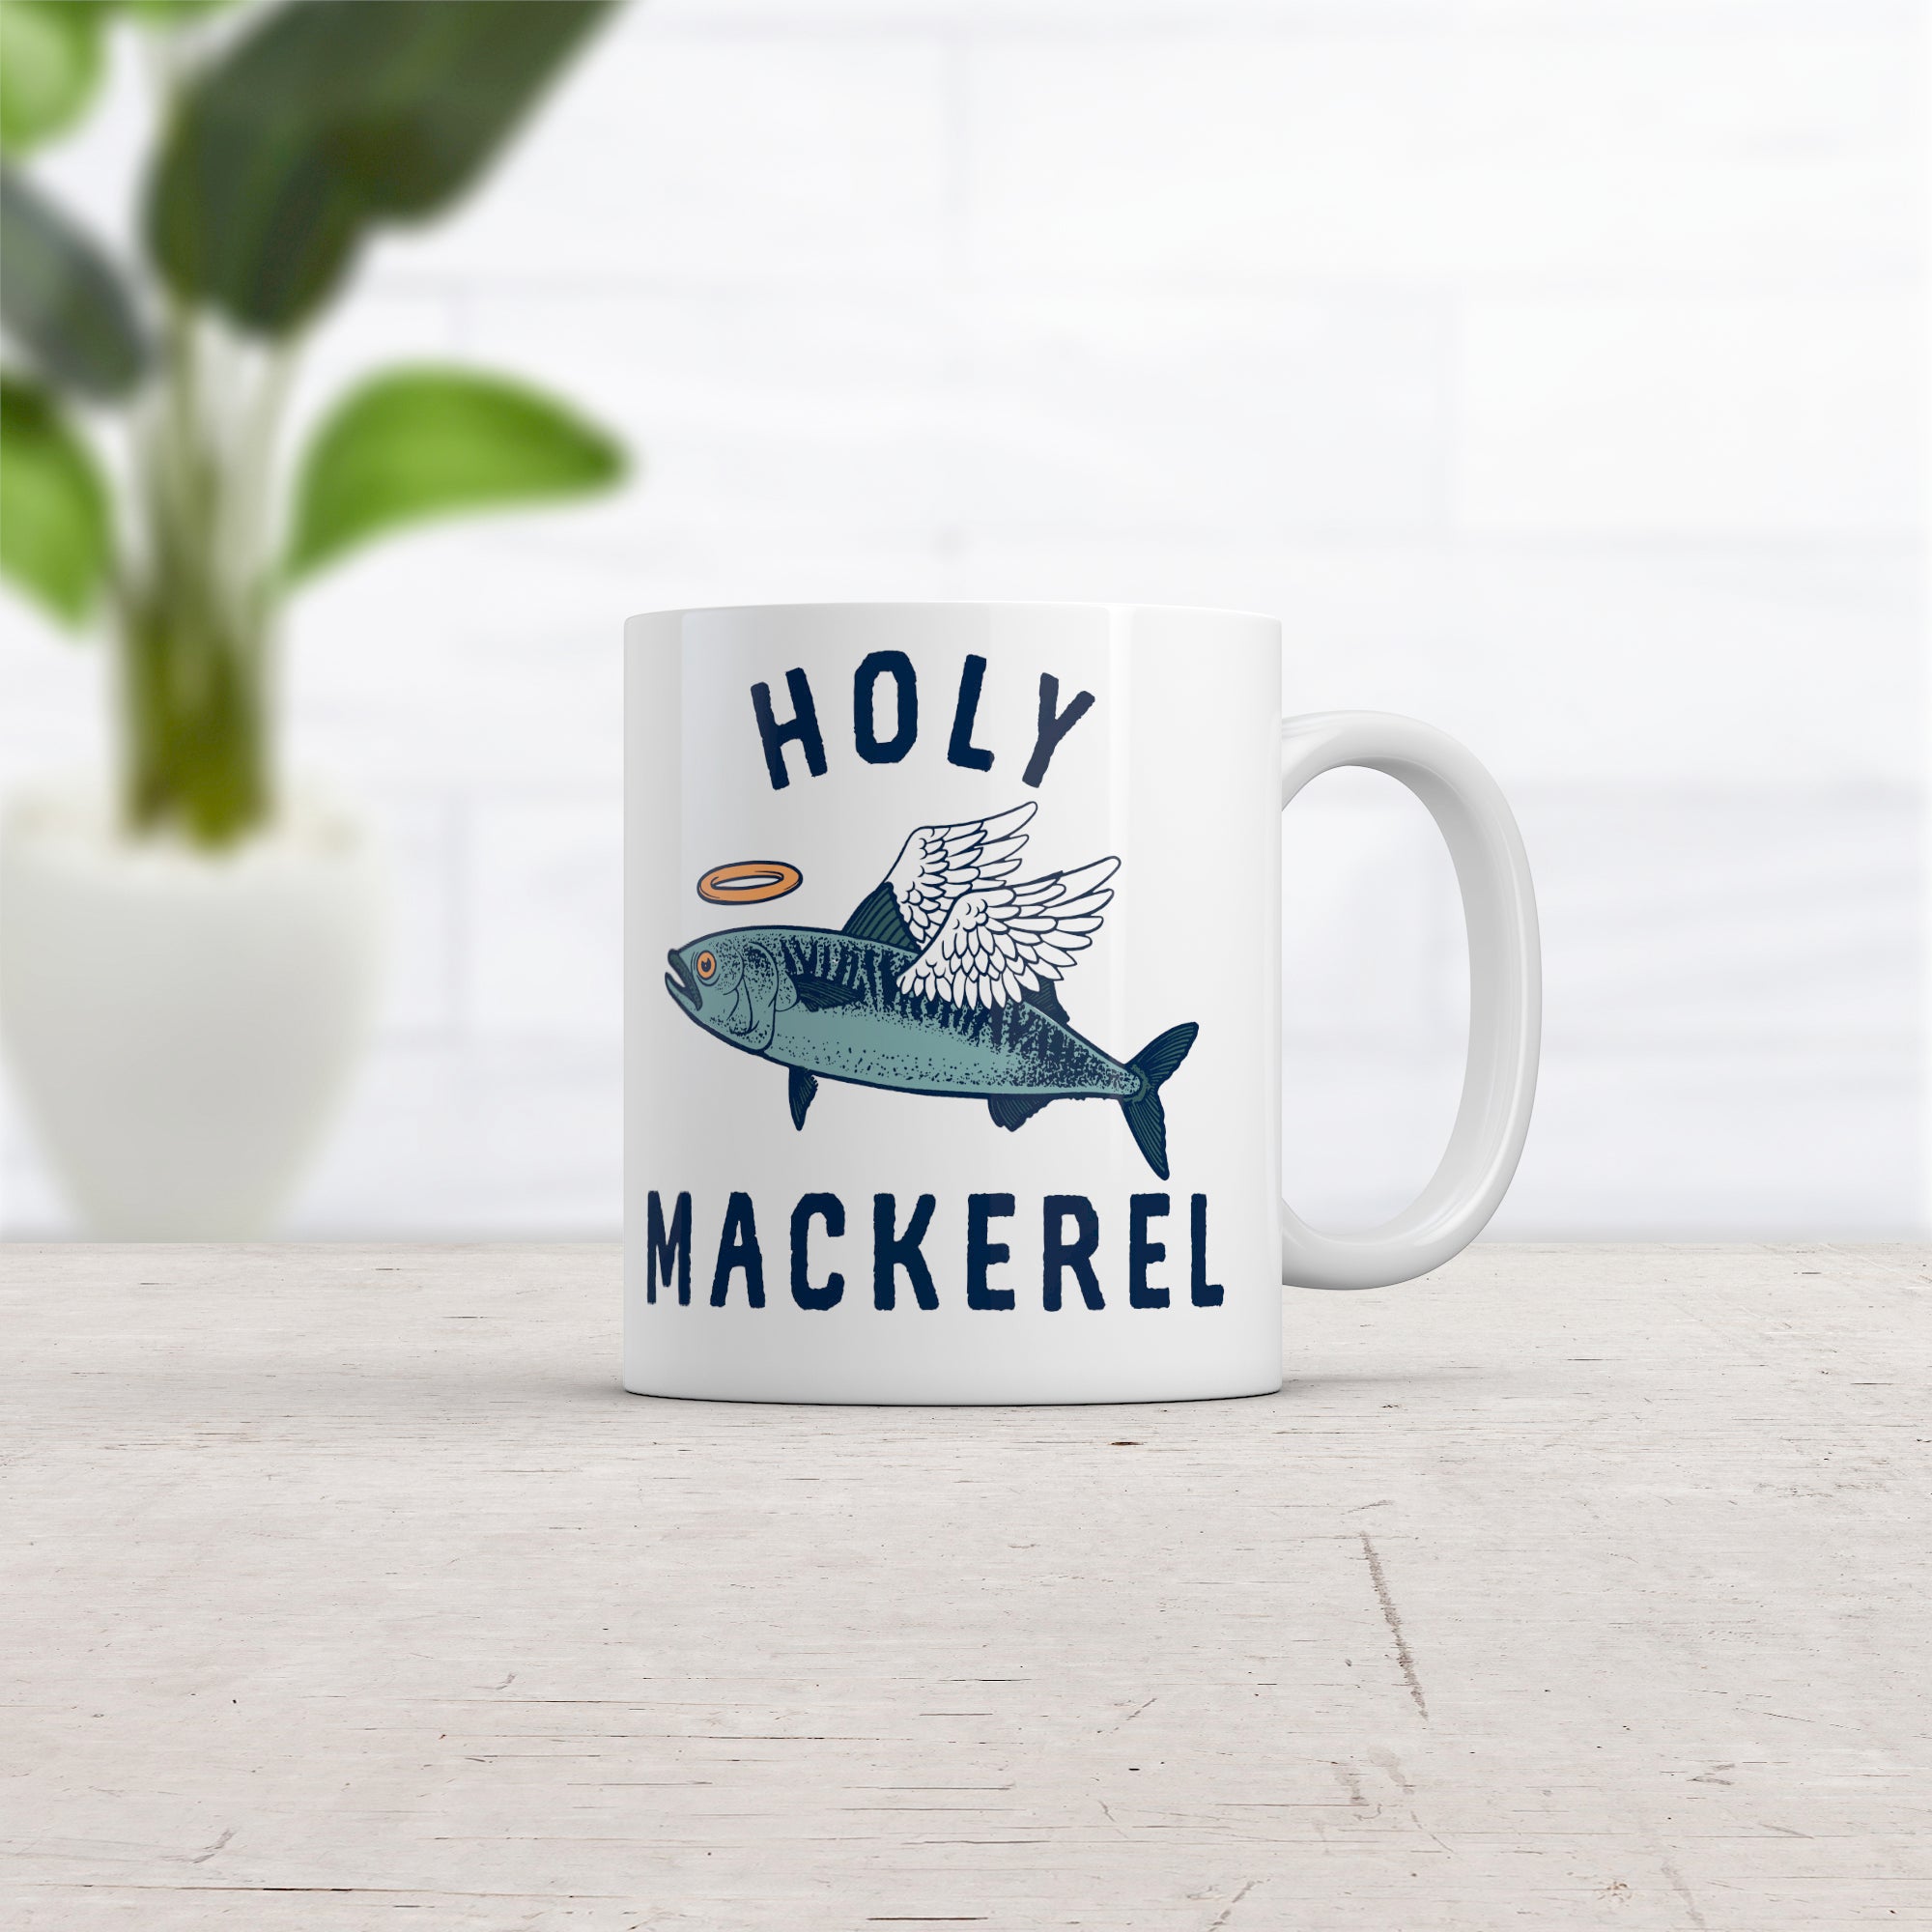 Fishing Coffee Mugs For Men Funny + Fishing gifts for men + Fathers Day  Gifts